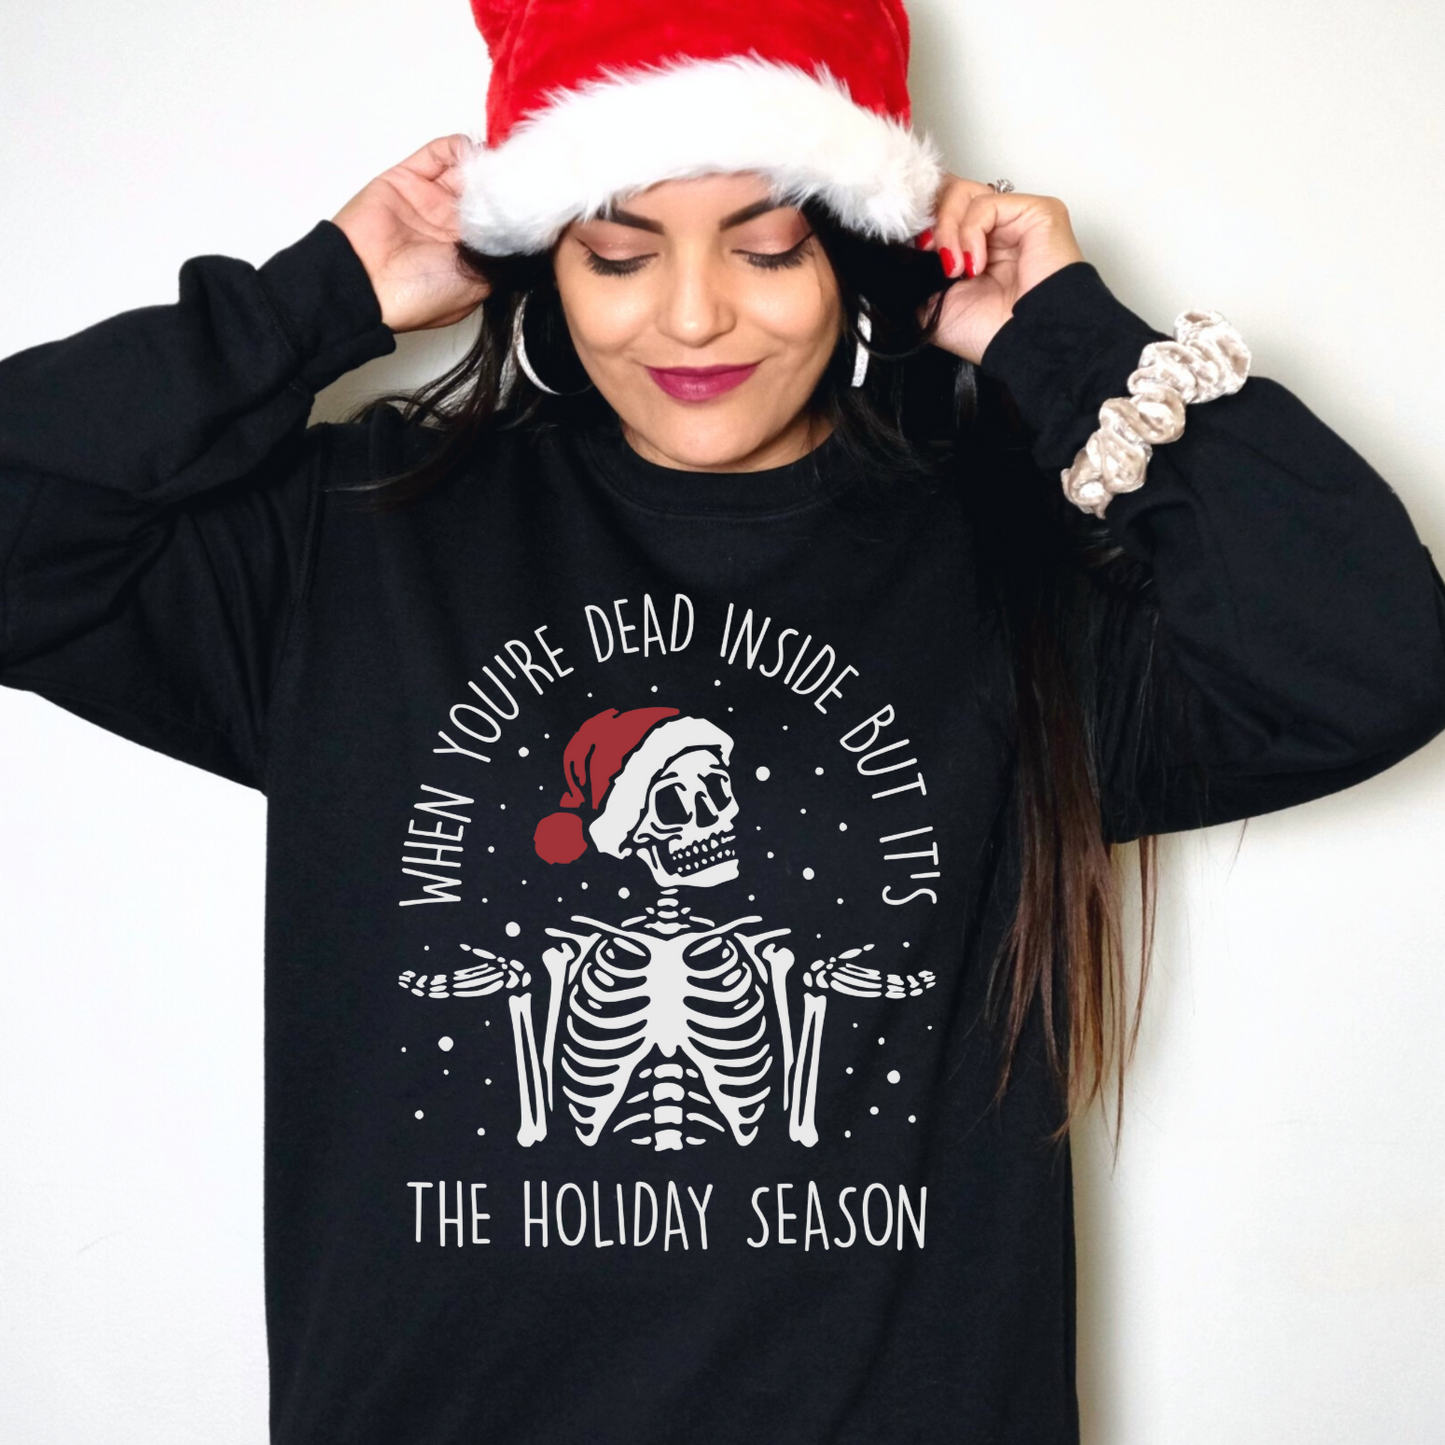 When You're Dead Inside Holiday Sweater